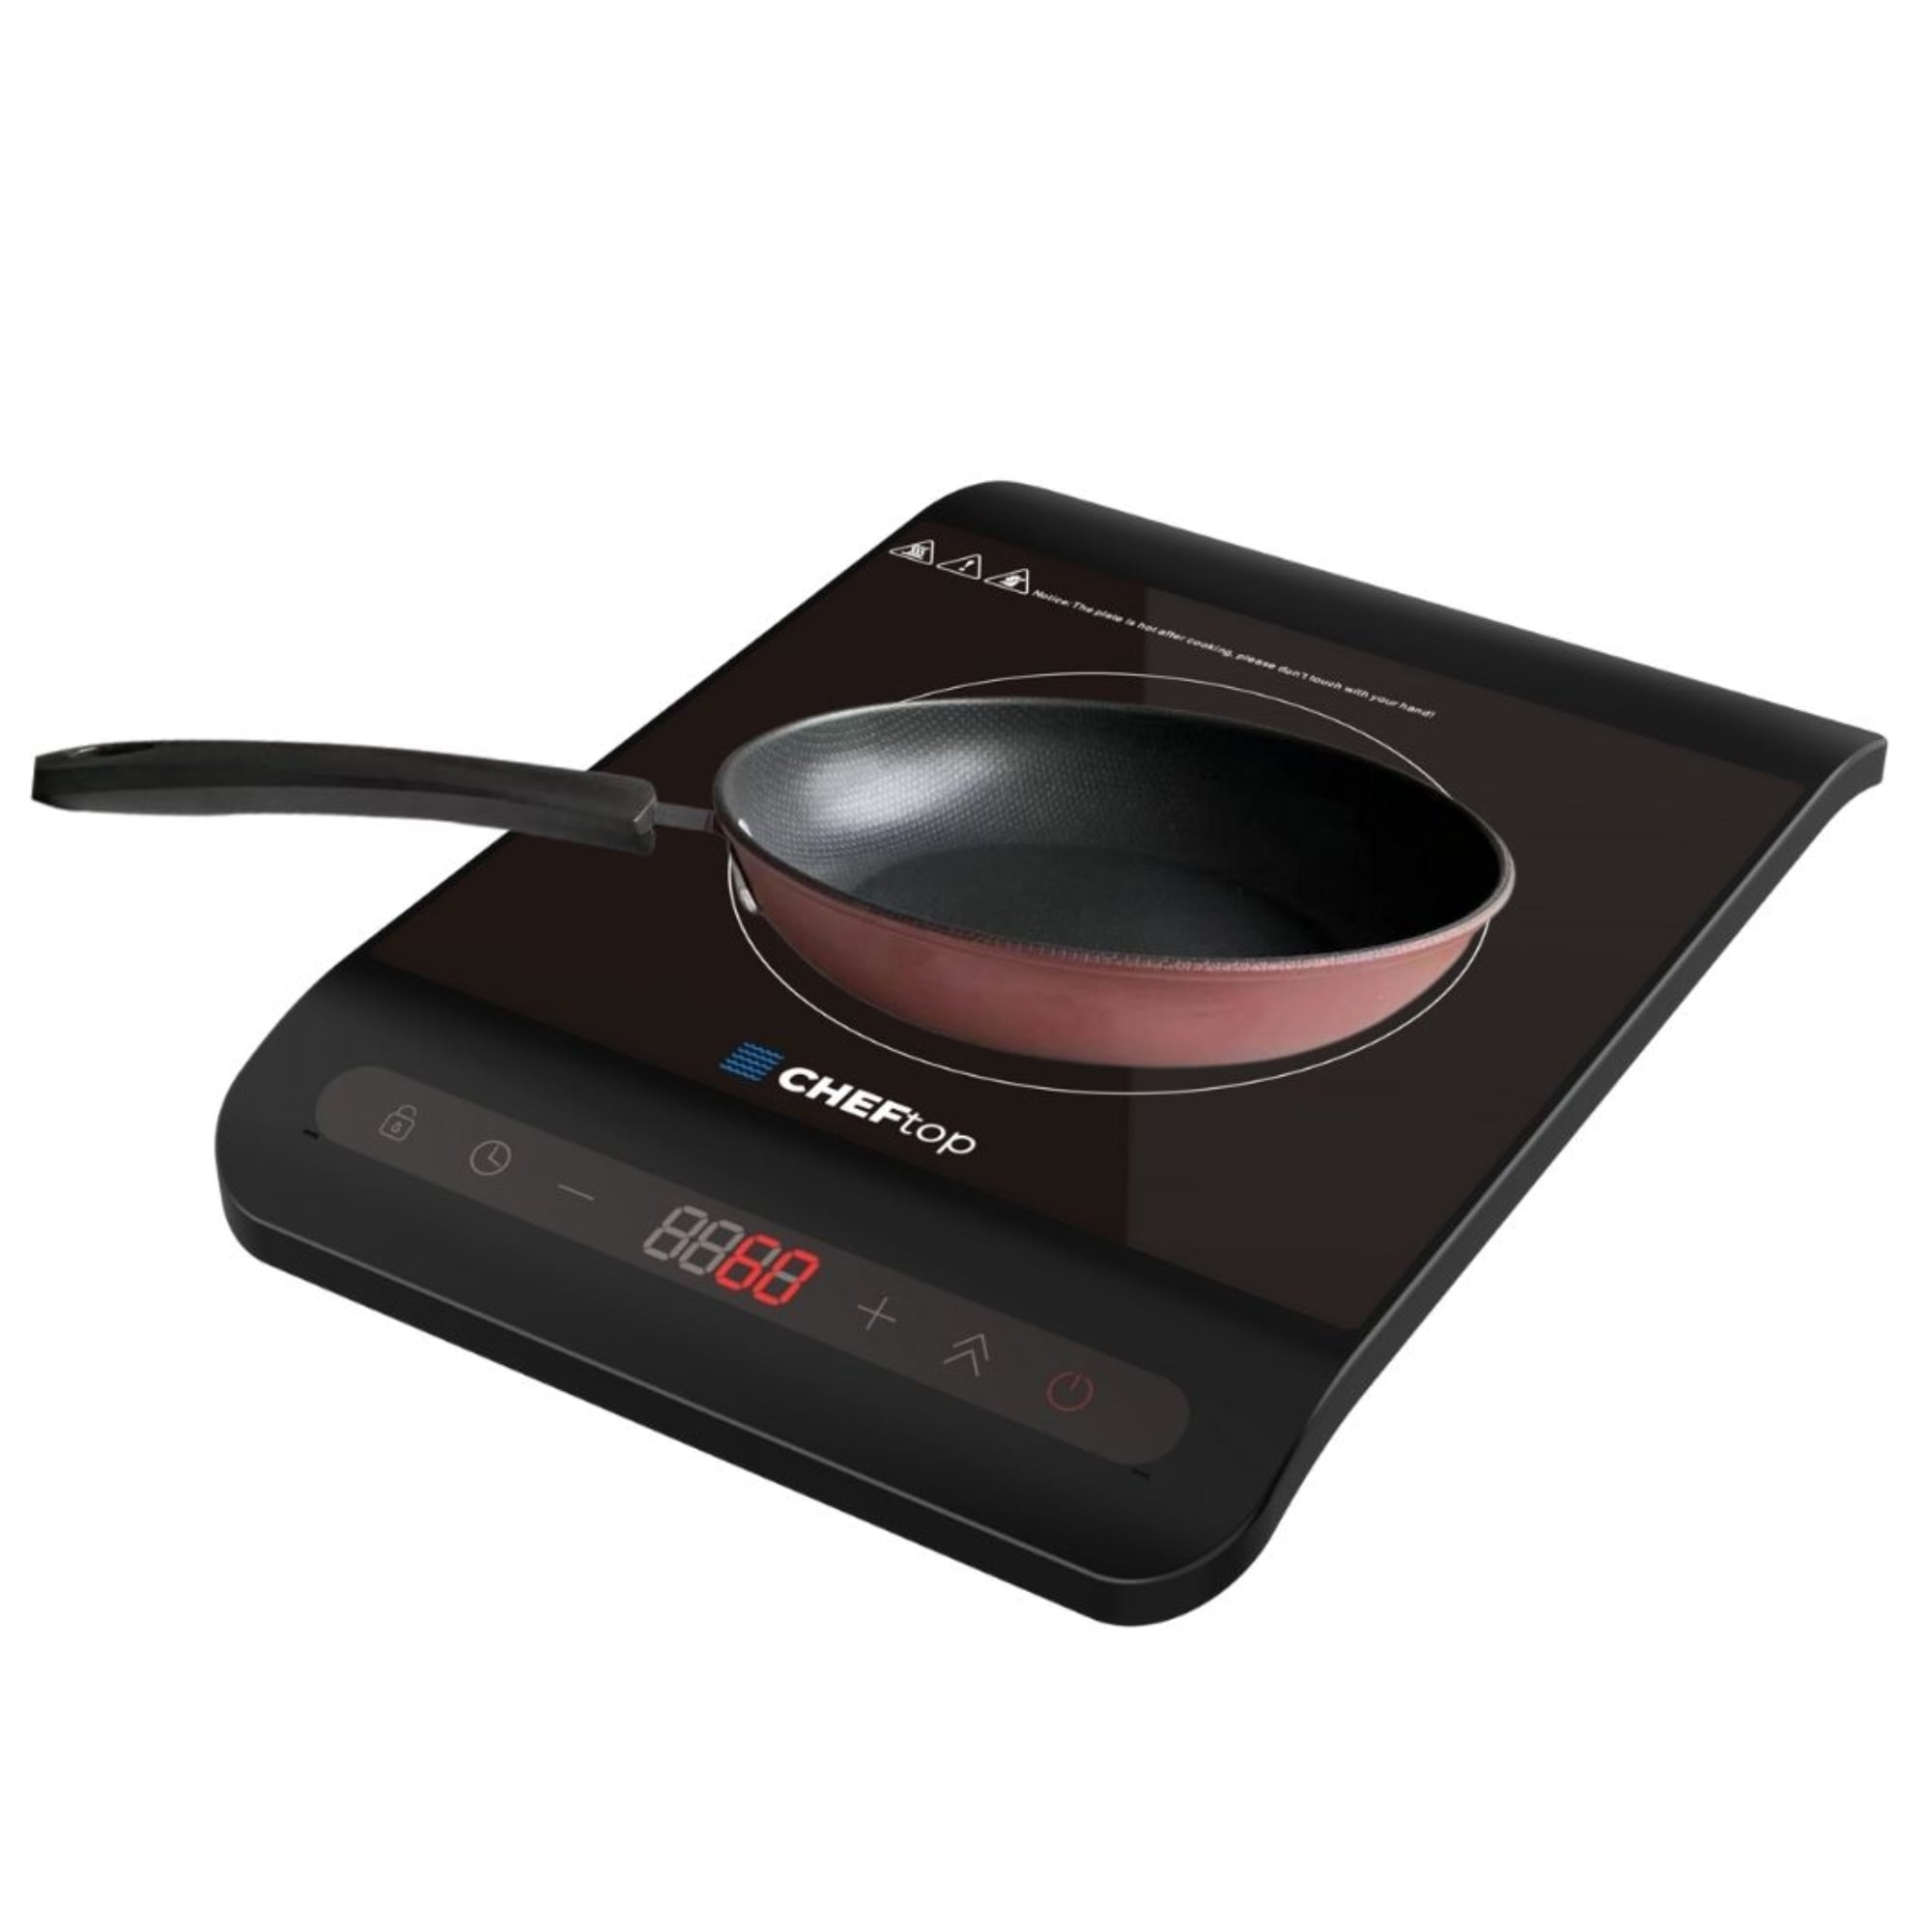 Induction Cooktop 36 inch, POTFYA Induction Cooker 5 Burner Built-in, 7400W Hot Plates for Cooking with Sensor Touch Control,Child Safety Lock